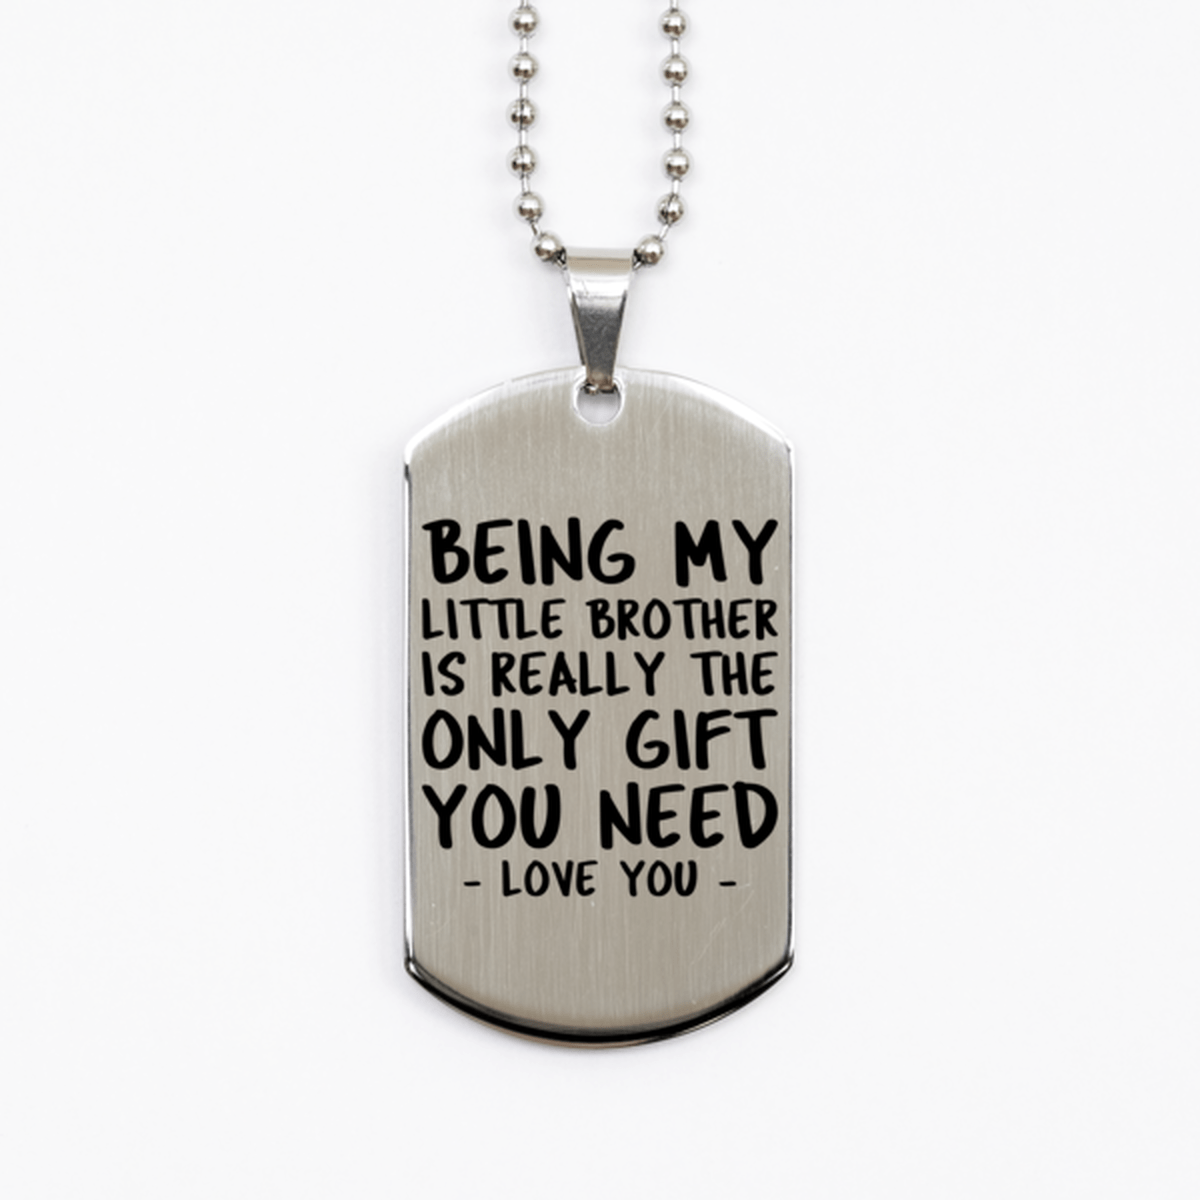 Funny Little Brother Silver Dog Tag Necklace, Being My Little Brother Is Really the Only Gift You Need, Best Birthday Gifts for Little Brother